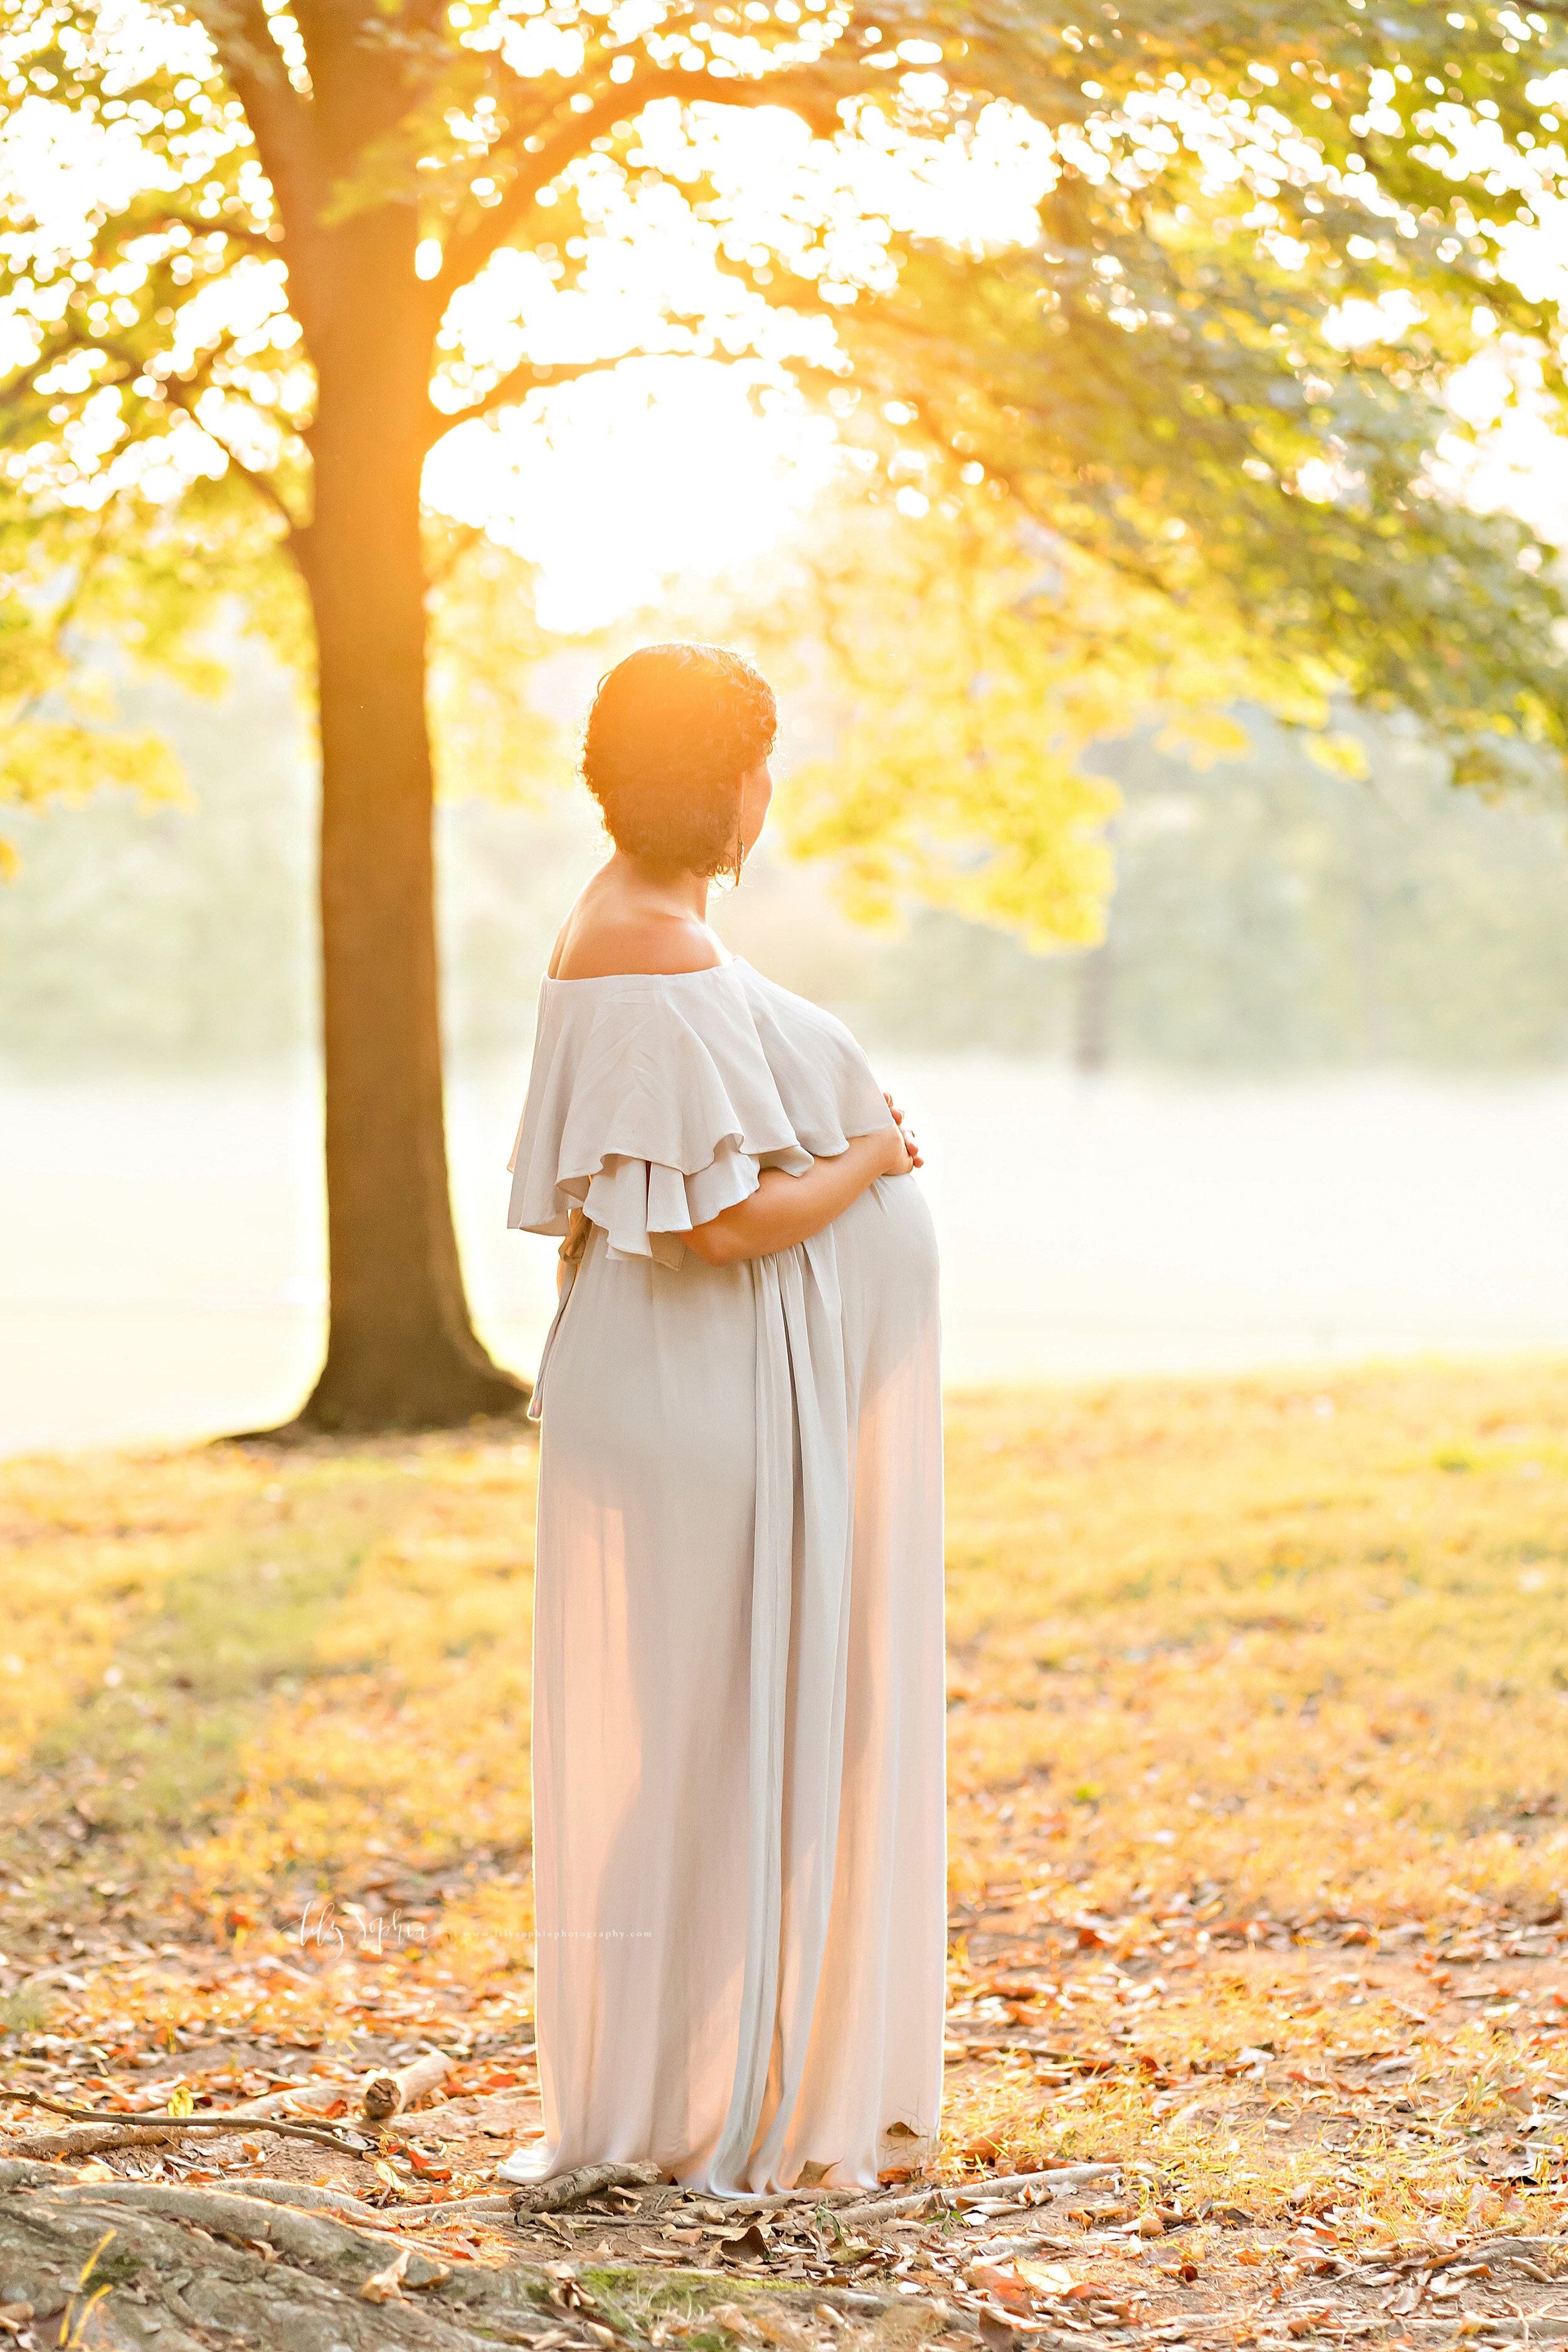 atlanta-decatur-old-fourth-ward-poncey-highlands-candler-park-grant-park-brookhaven-buckhead-virginia-highlands-west-end-decatur-lily-sophia-photography-family-maternity-park-session_2418.jpg